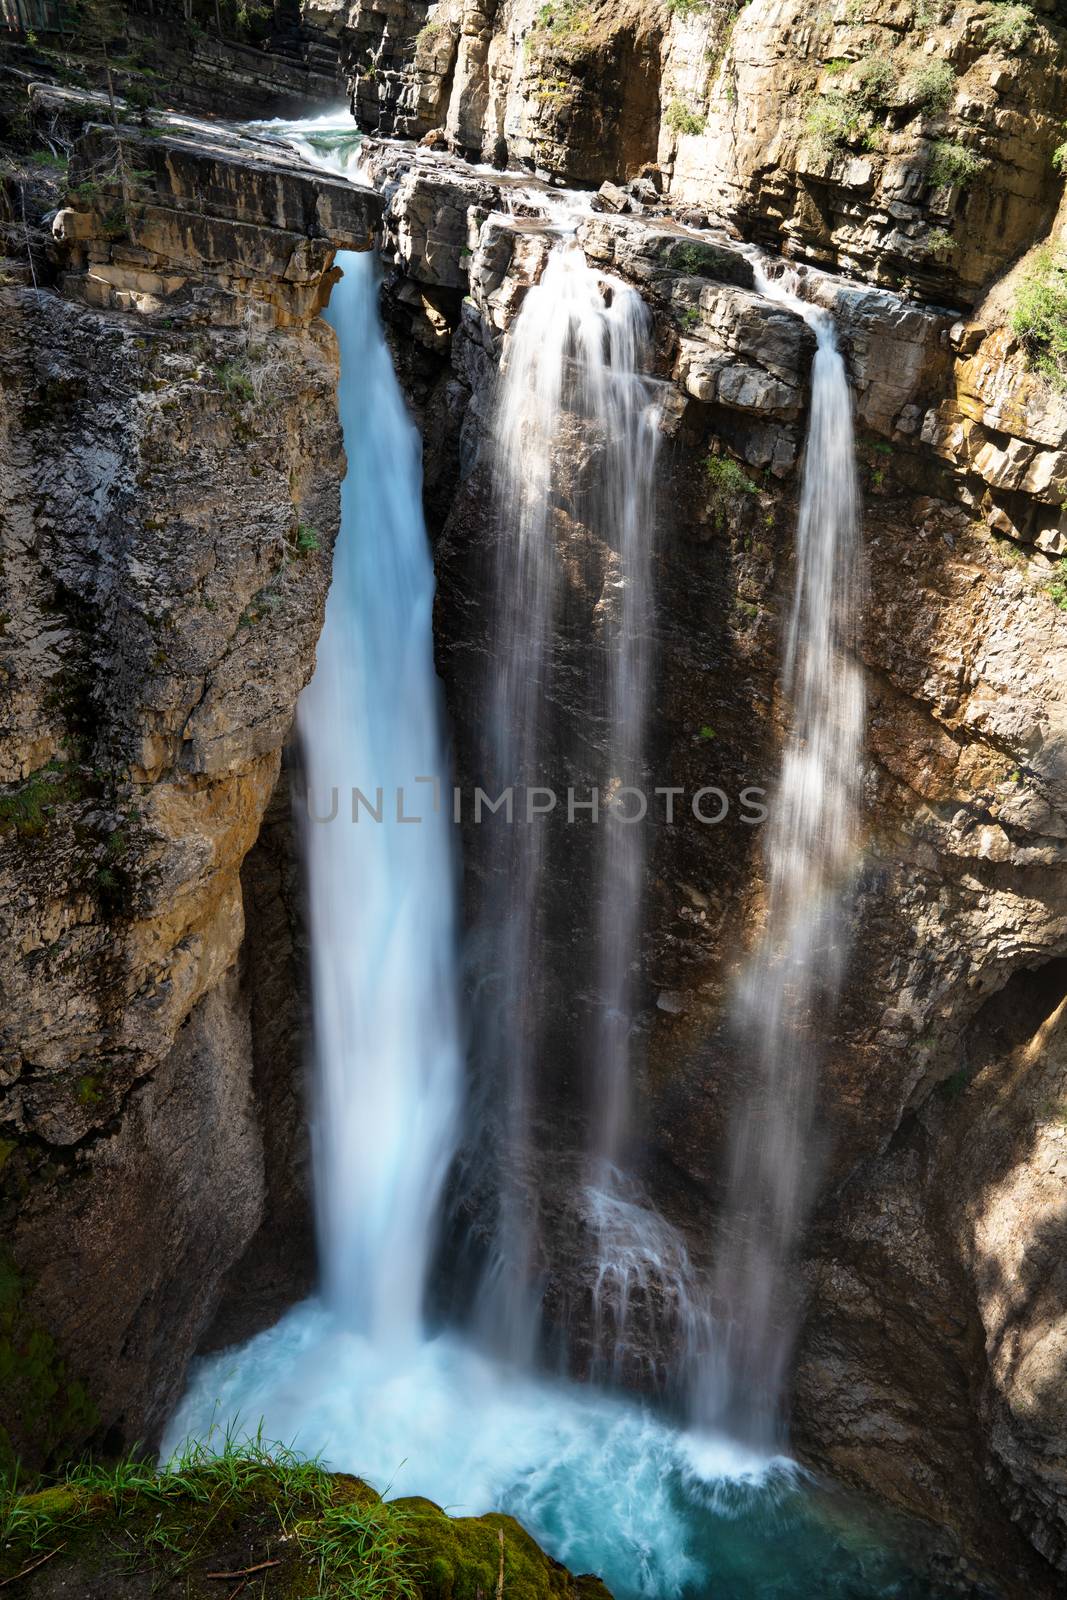 Longexposure image of a waterfall within the Johnston Canyon, Bow Valley Parkway, Banff National Park, Alberta, Canada